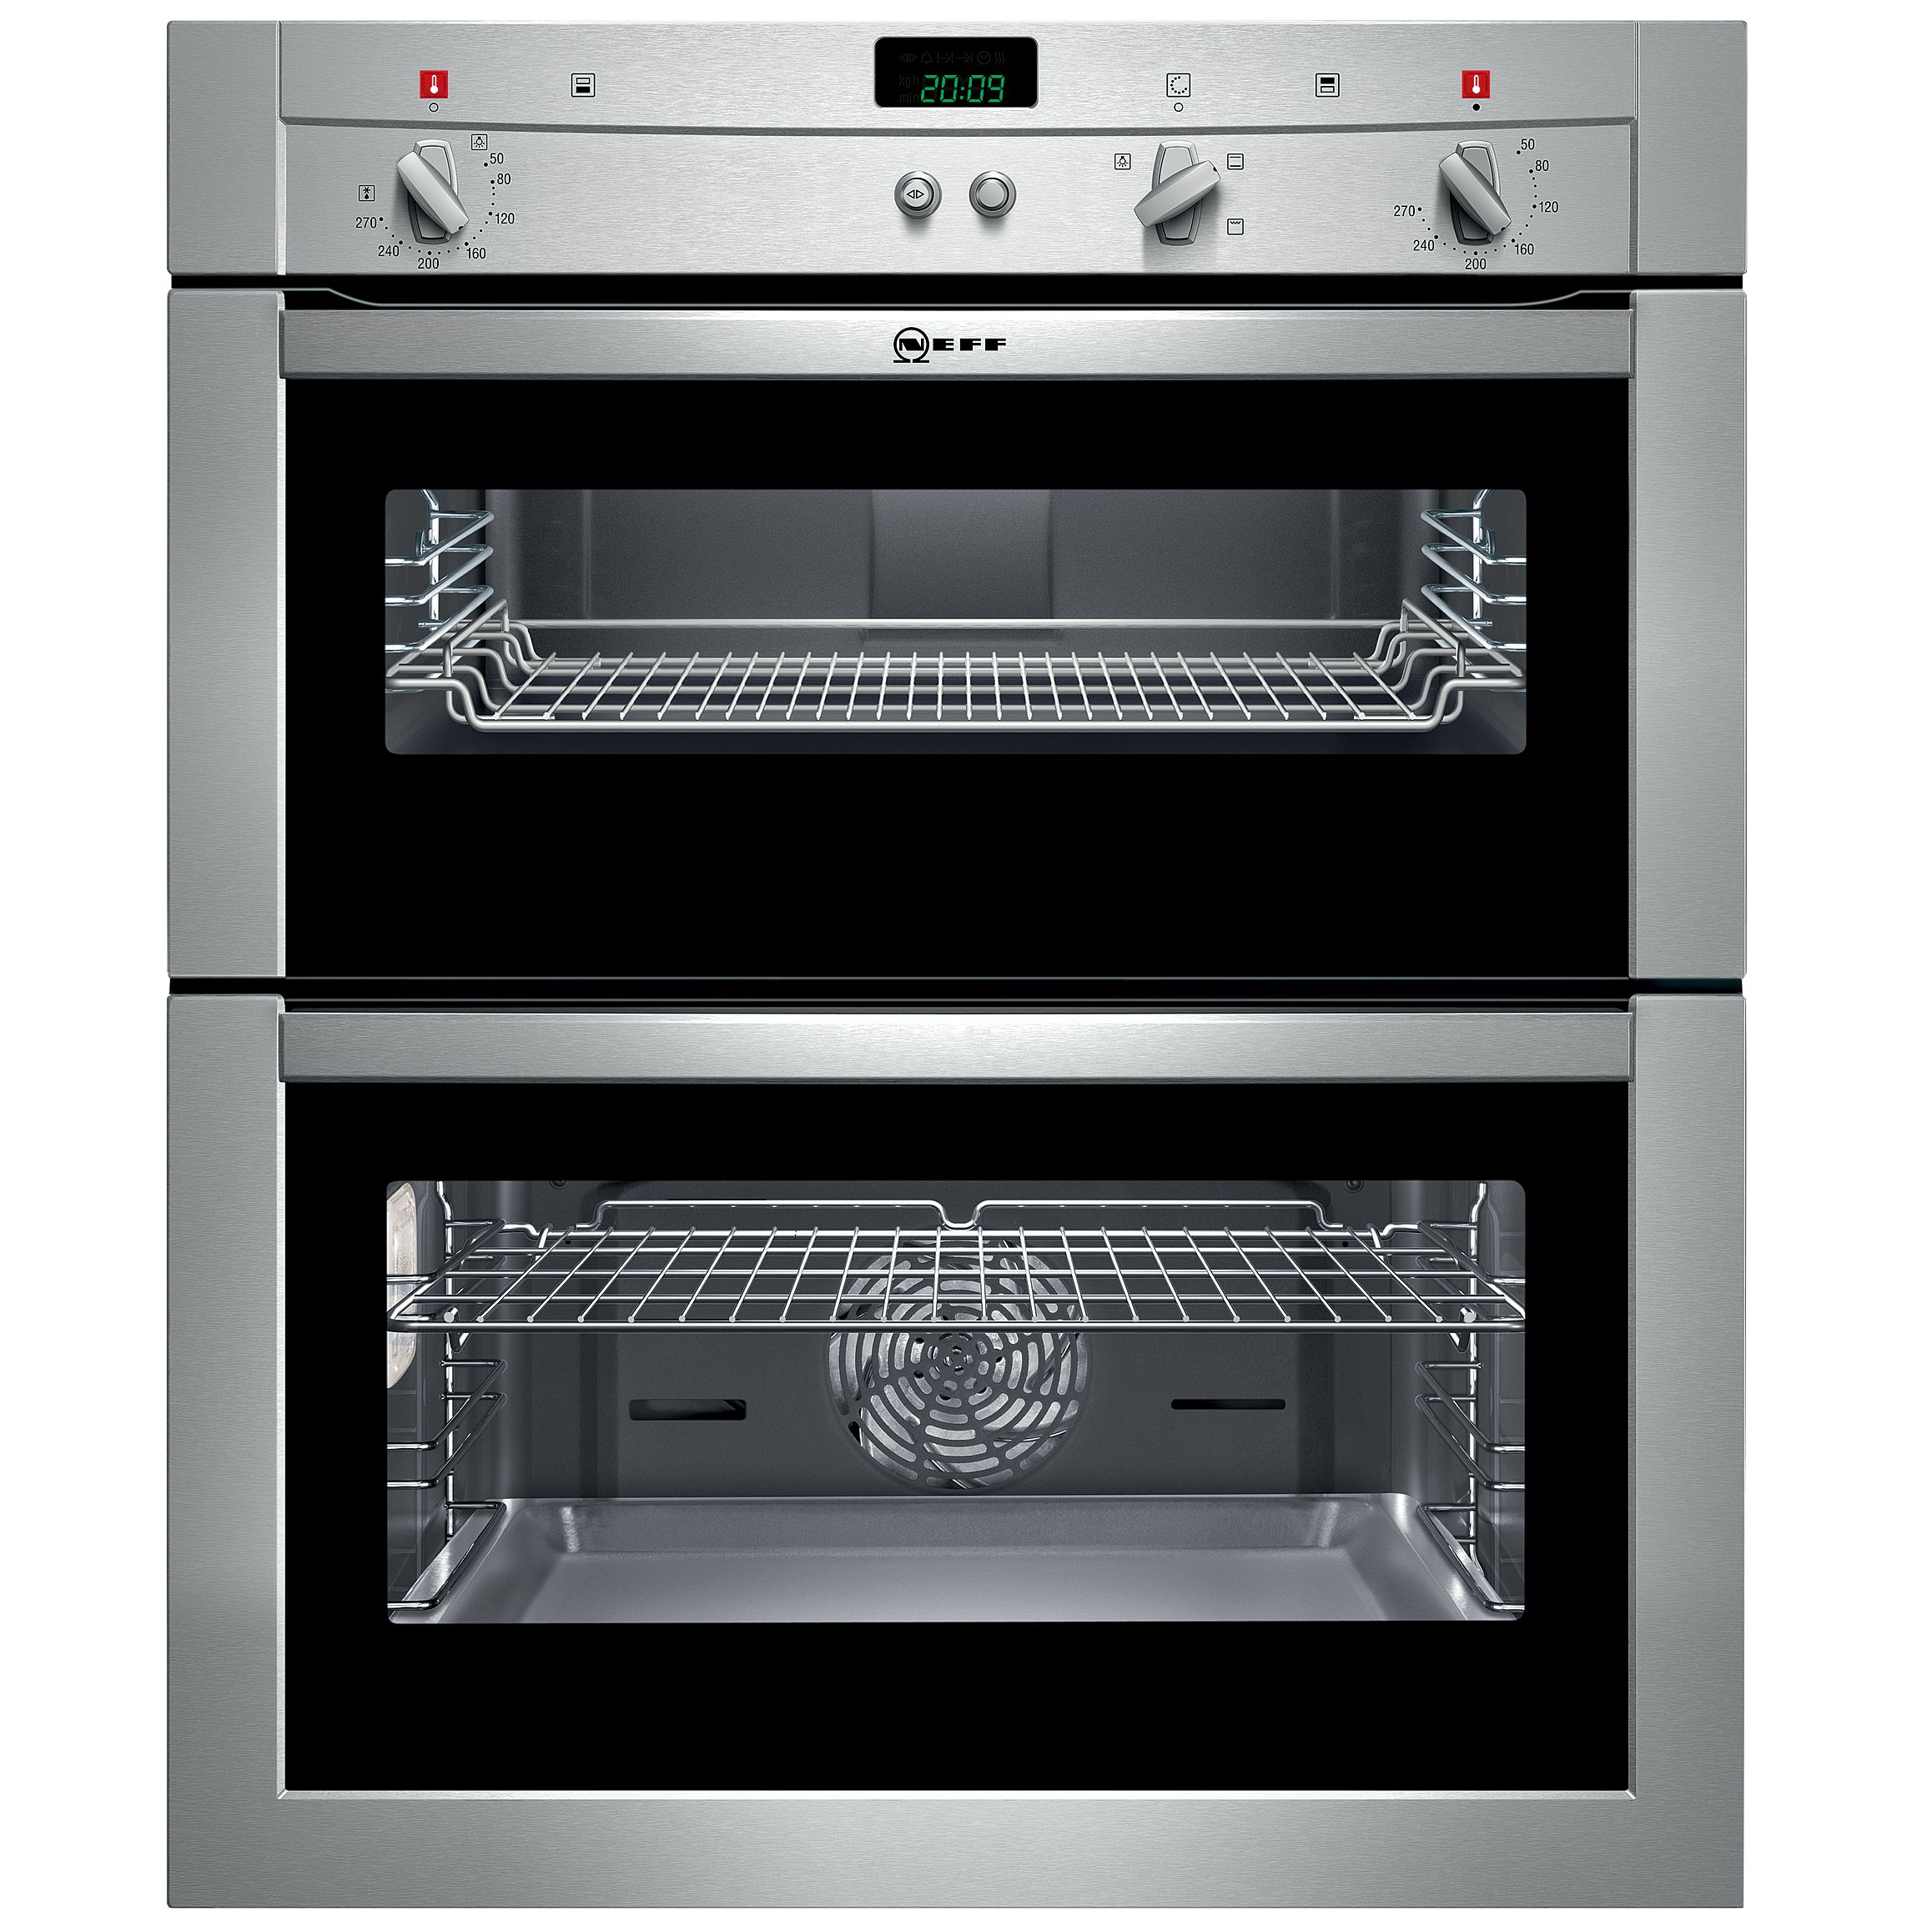 Neff U17M42NOGB Double Electric Oven, Stainless Steel at John Lewis